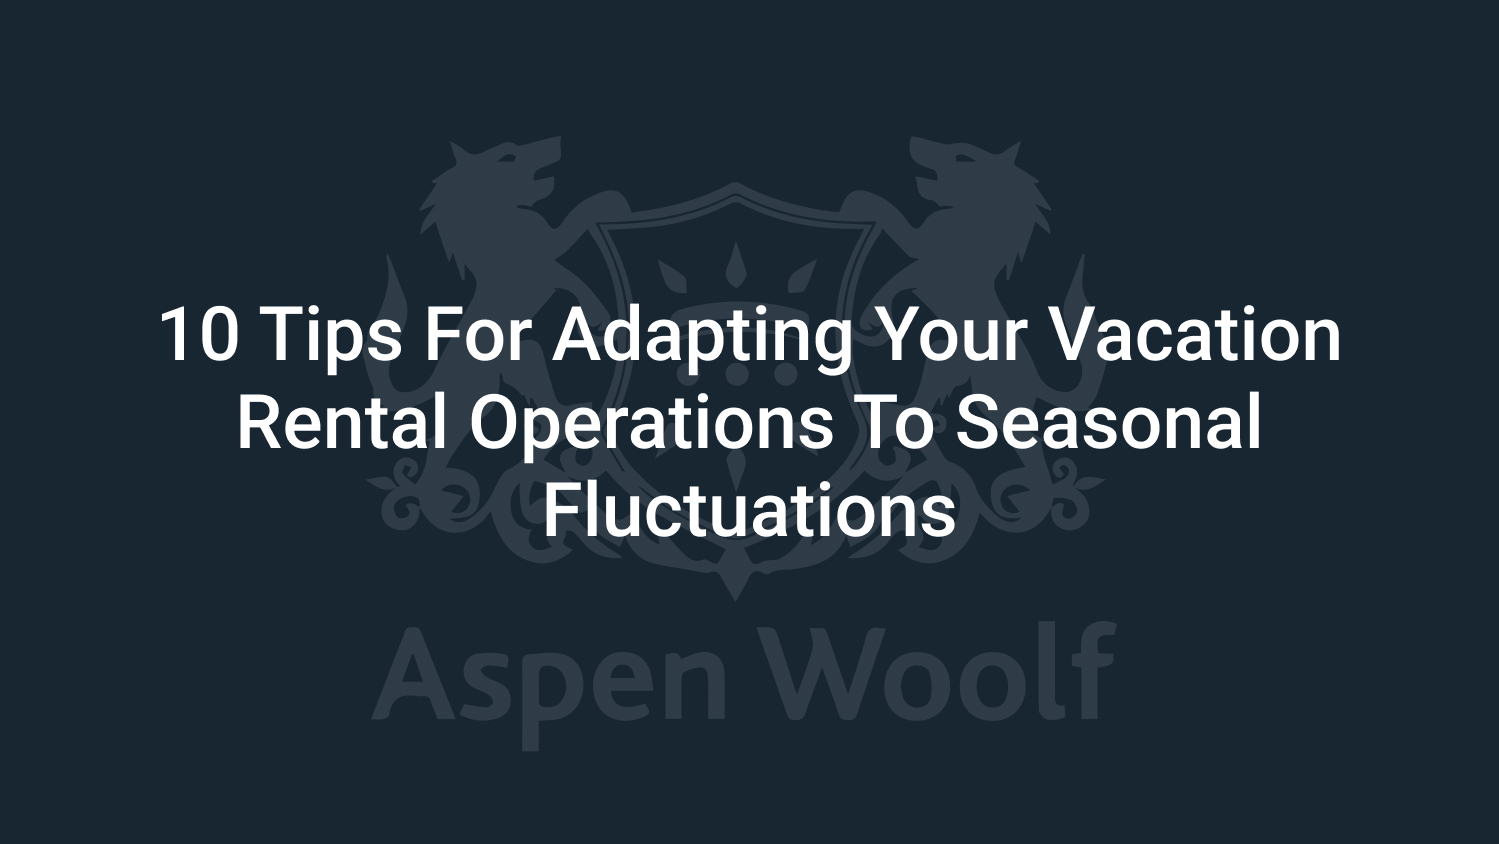 10 Tips for Adapting Your Vacation Rental Operations to Seasonal Fluctuations